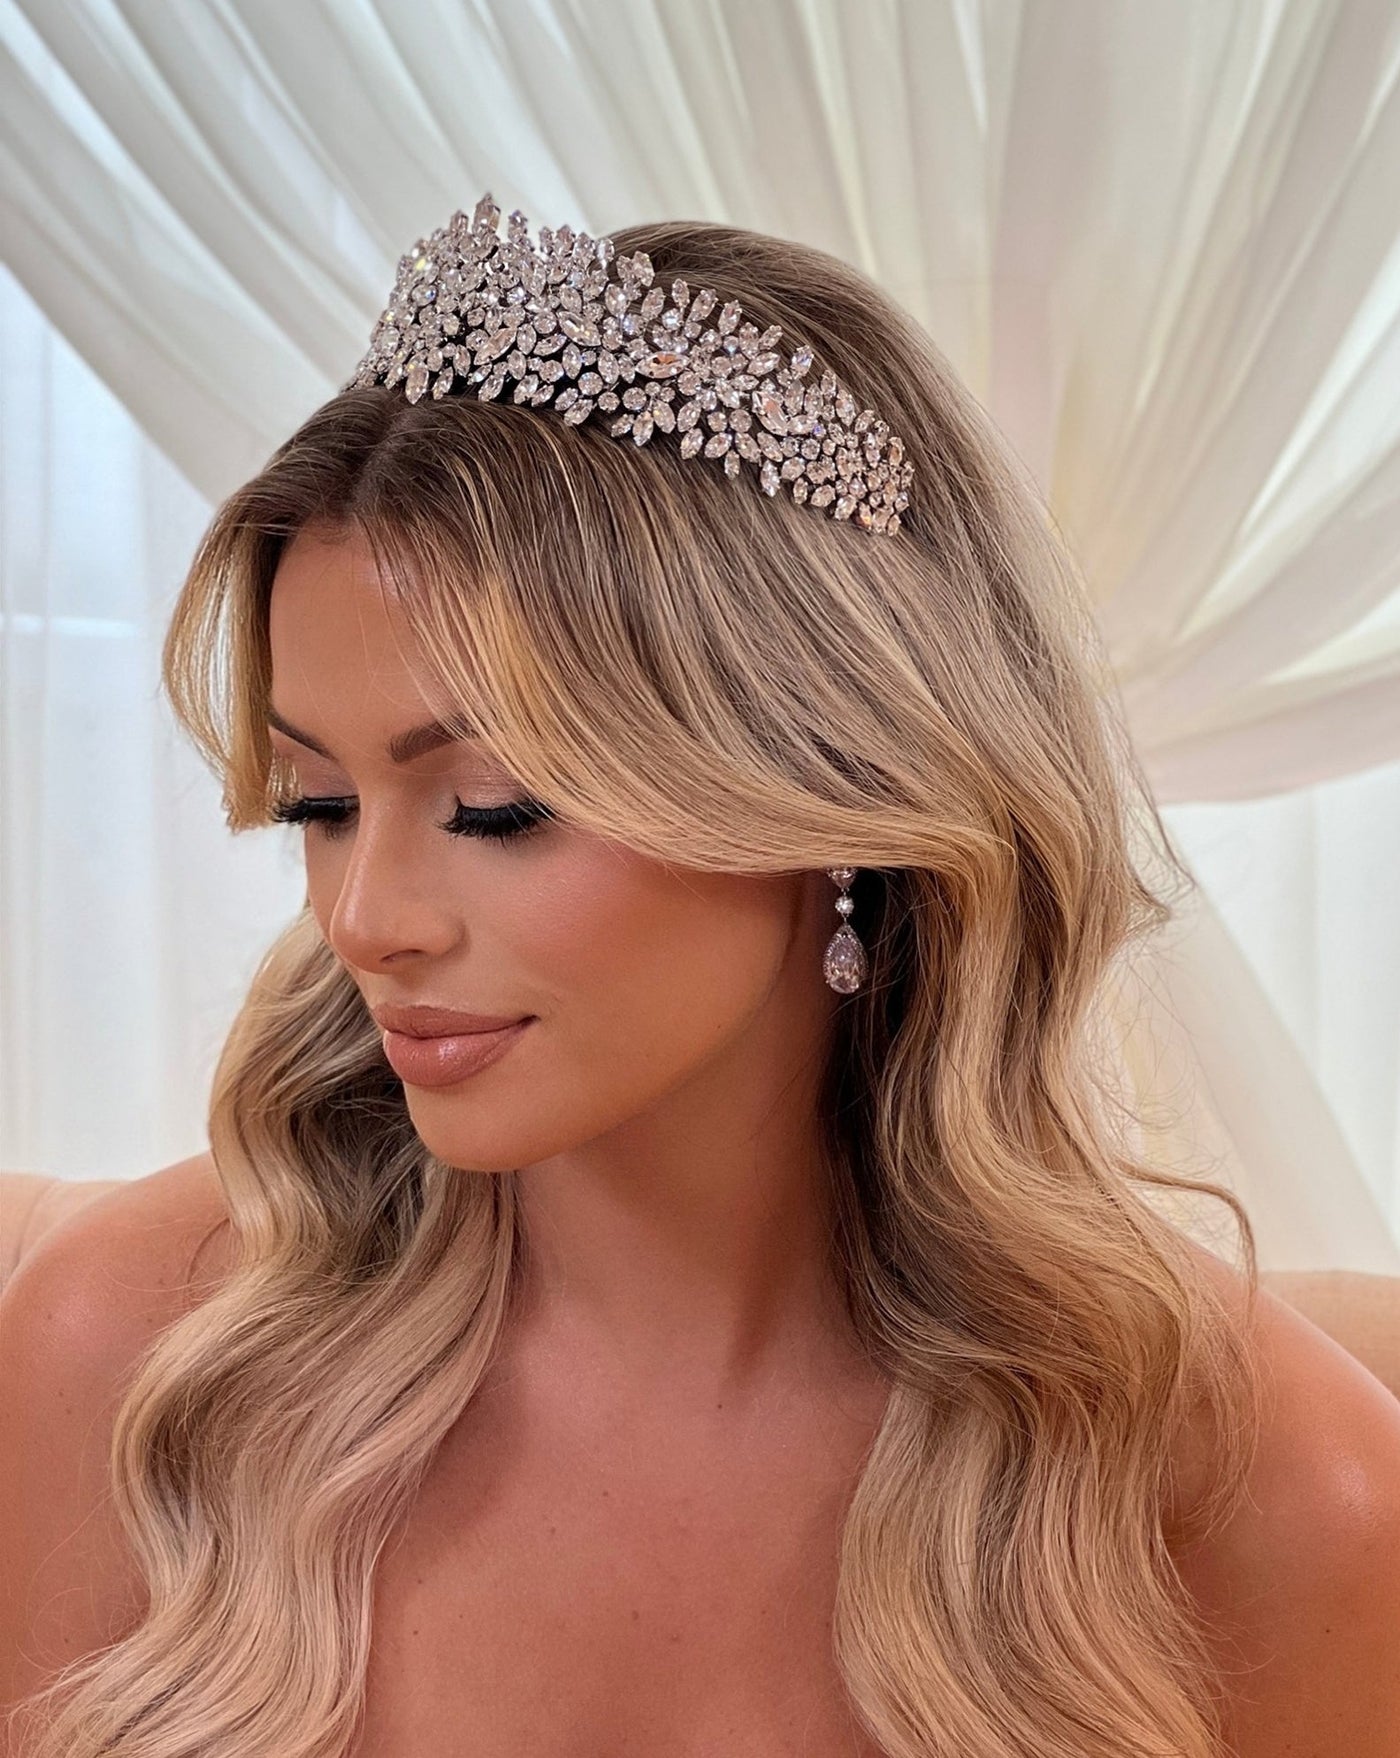 female model wearing pointed bridal crown made up of round cut crystal clusters